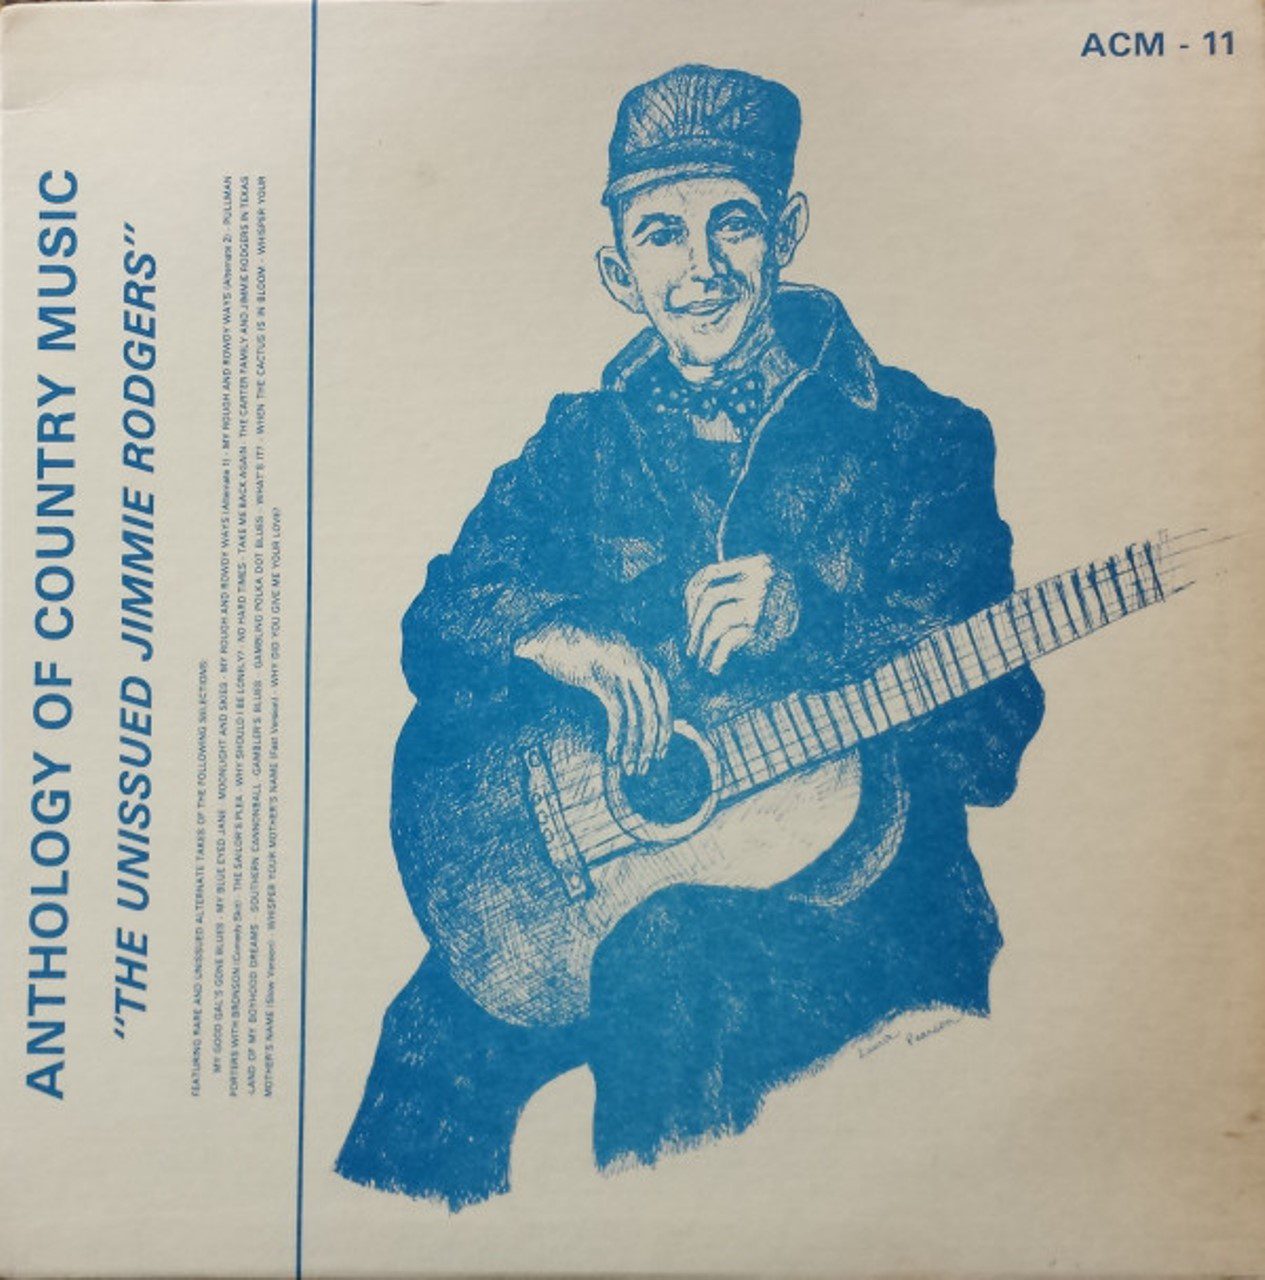 Jimmie Rodgers – The Unissued Jimmie Rodgers cover album